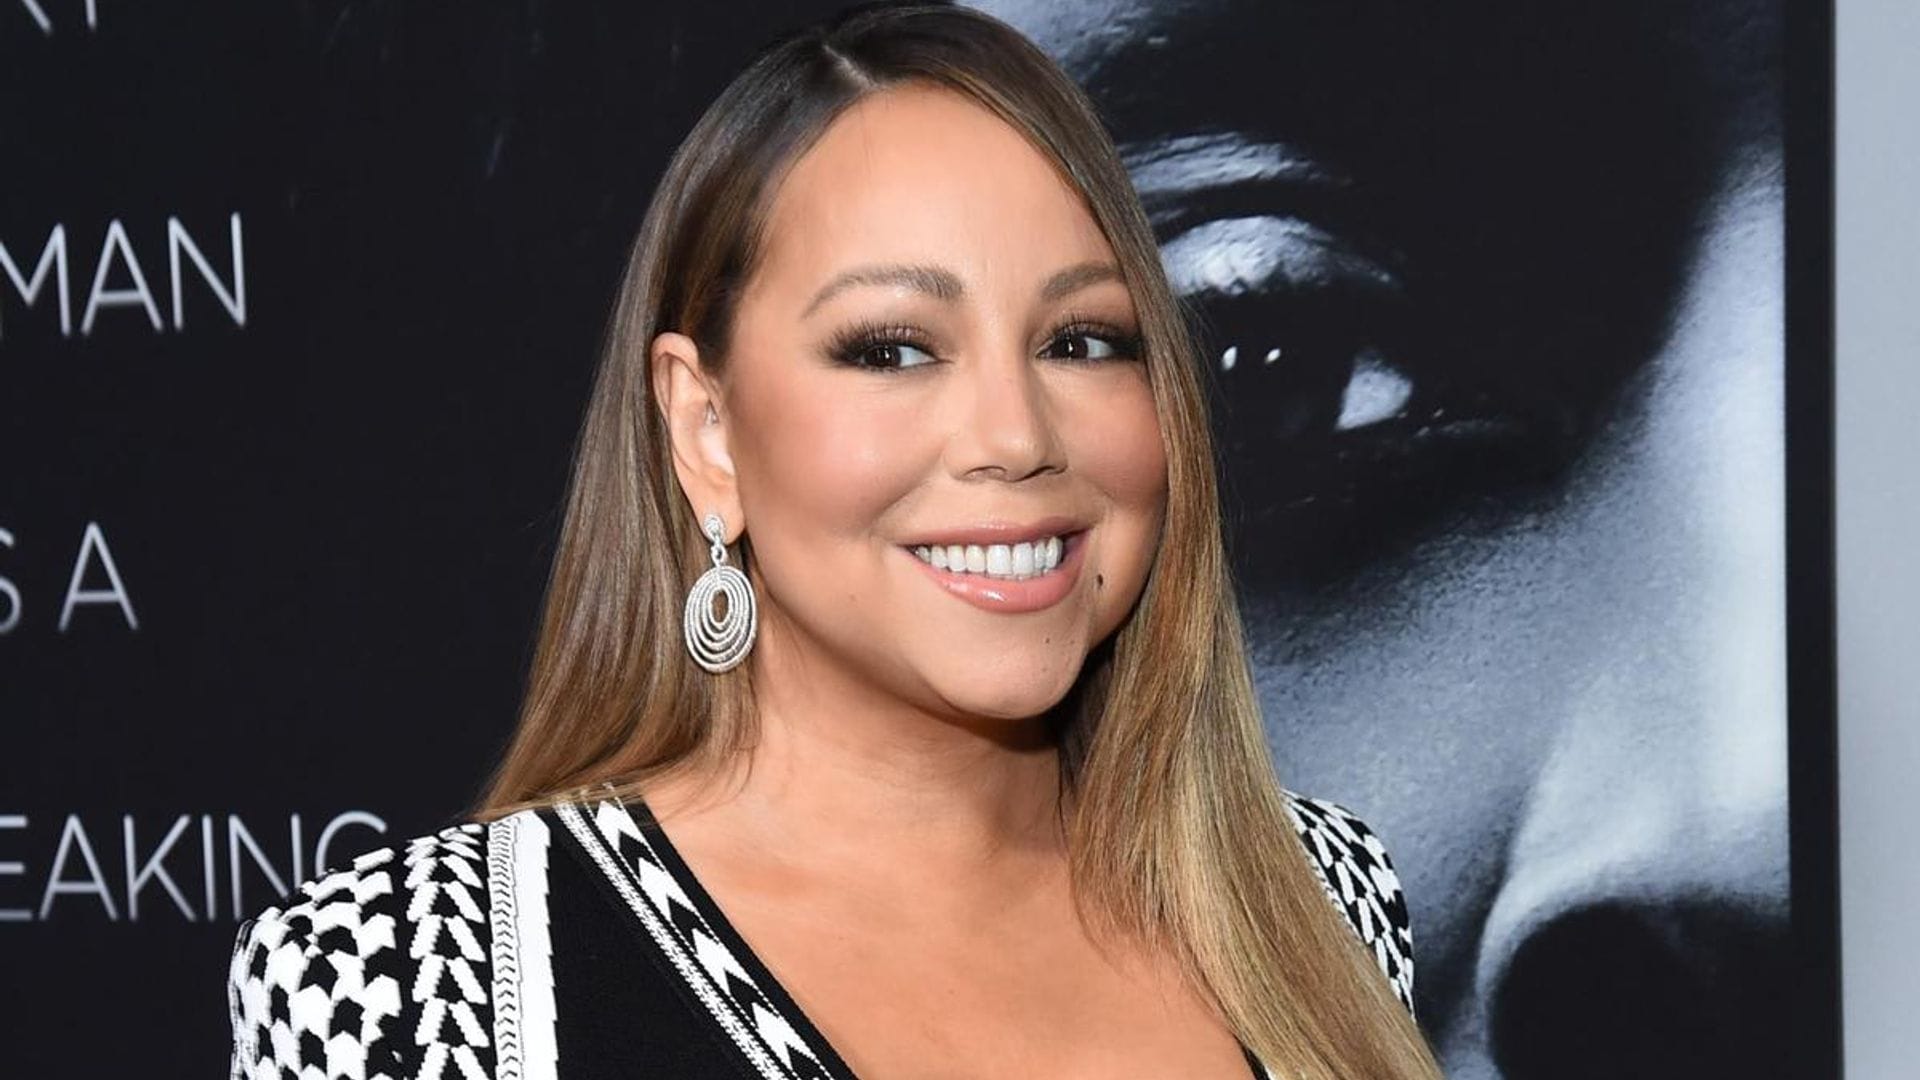 Mariah Carey goes on a movie date with boyfriend Bryan Tanaka wearing a sequined mini dress